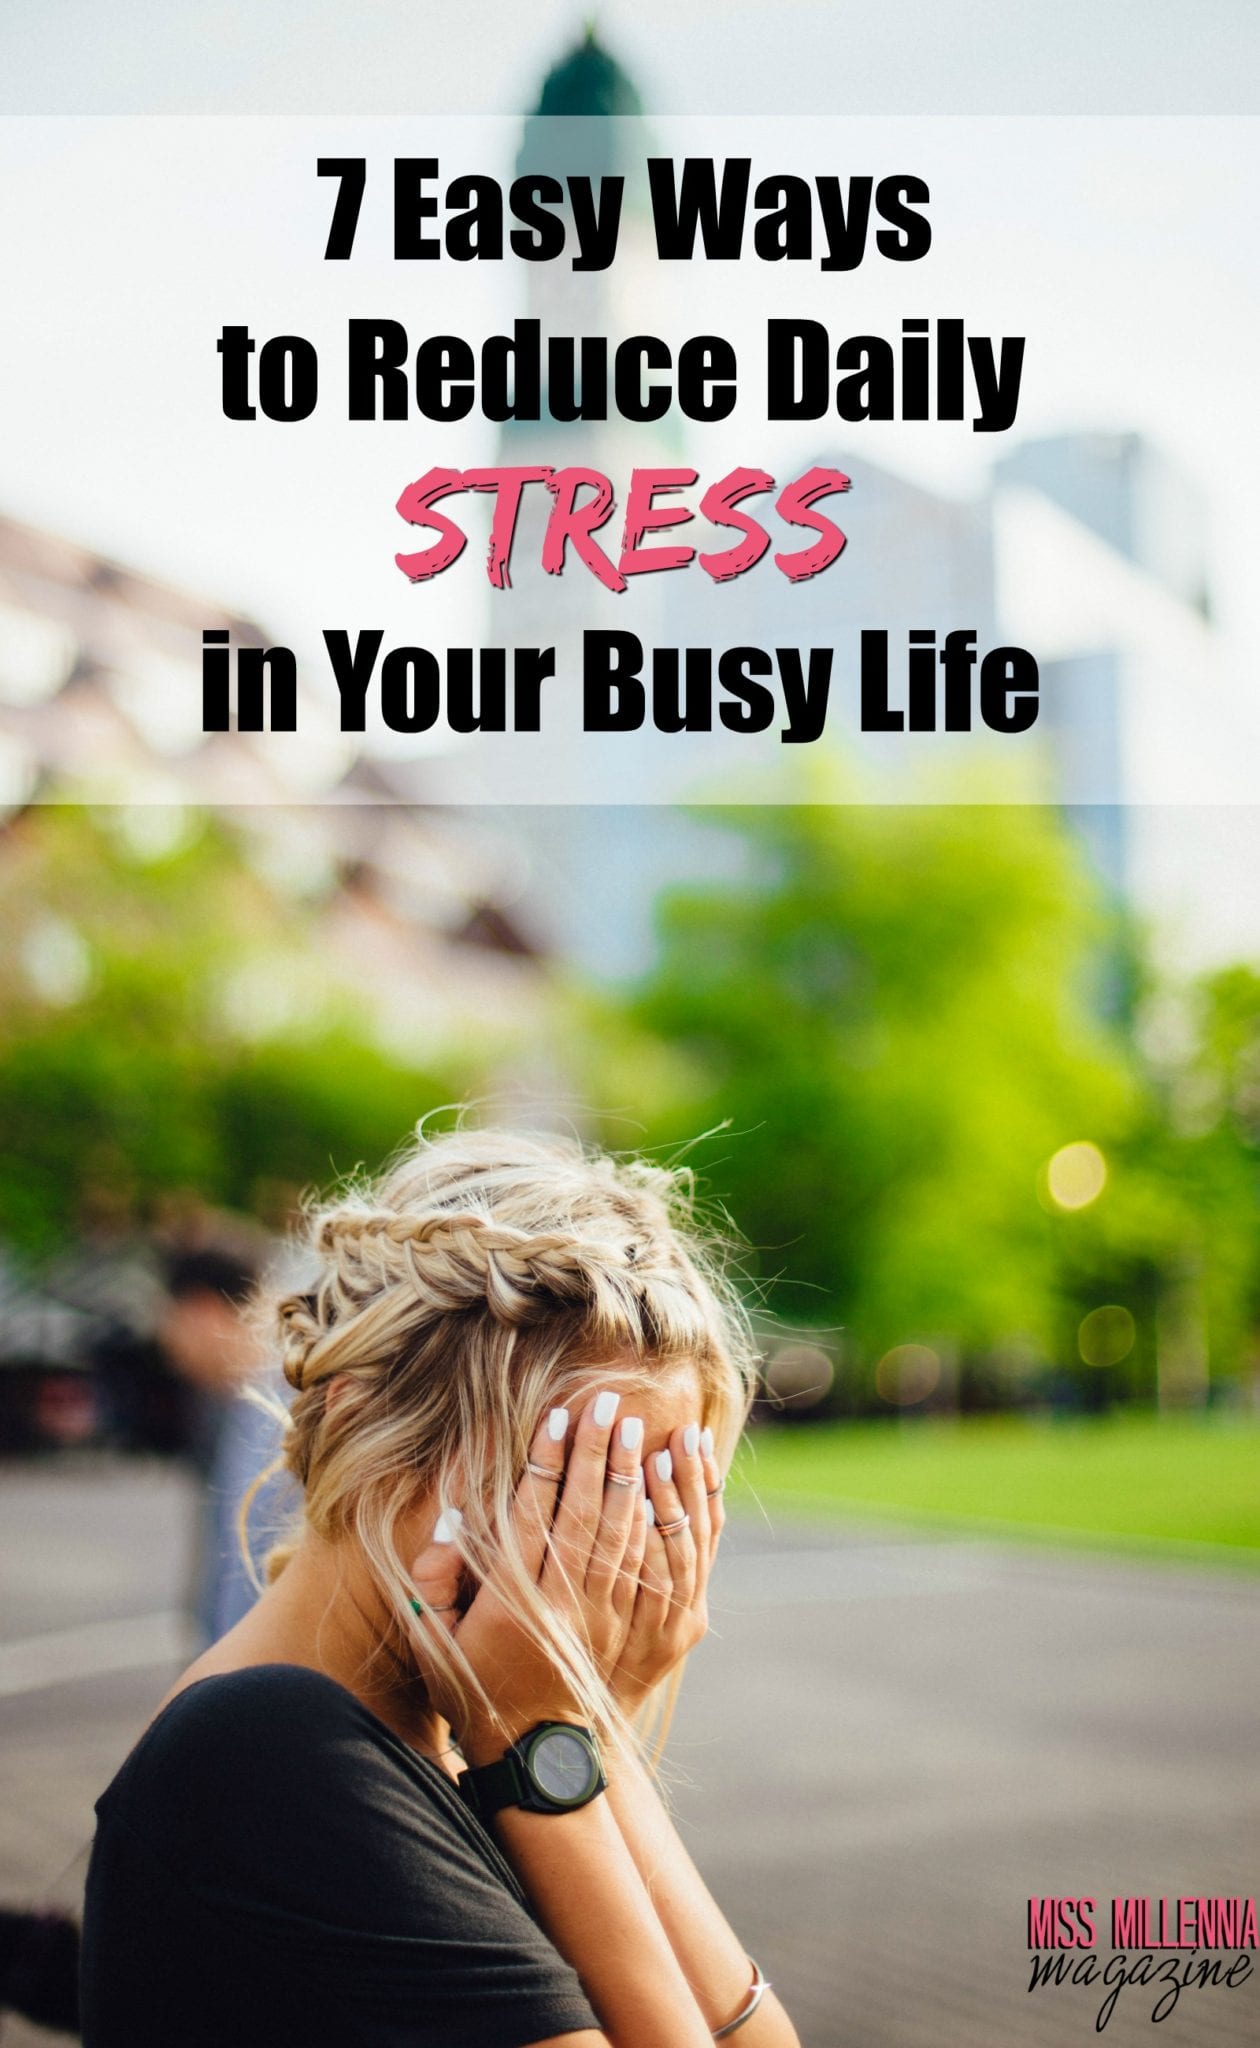 7 Easy Ways to Reduce Daily Stress in Your Busy Life